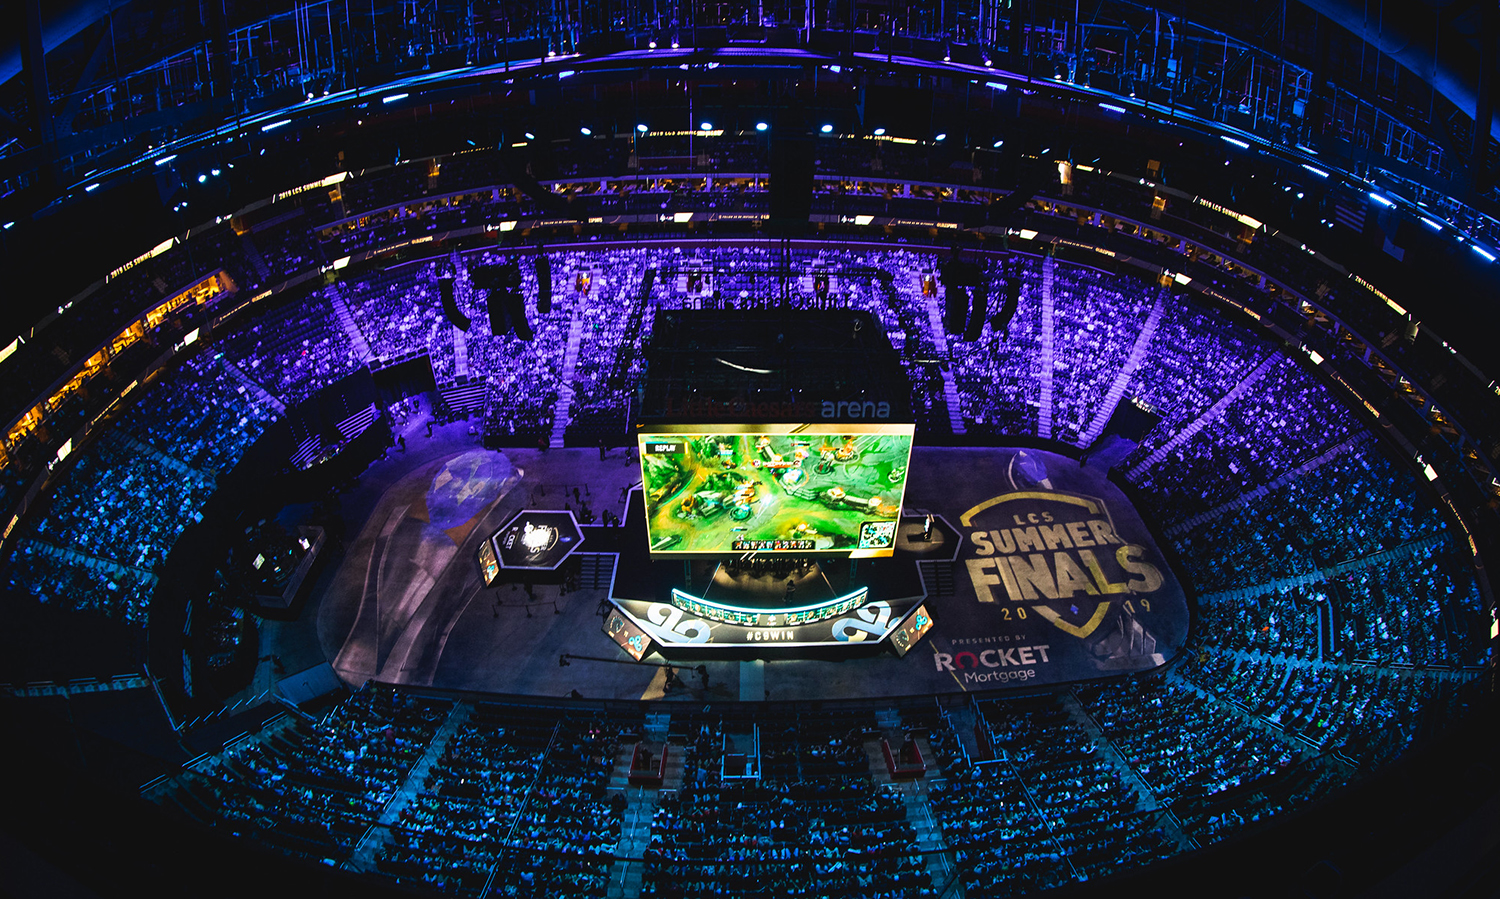 League of Legends Championship Series: The Ultimate Guide for NA LCS